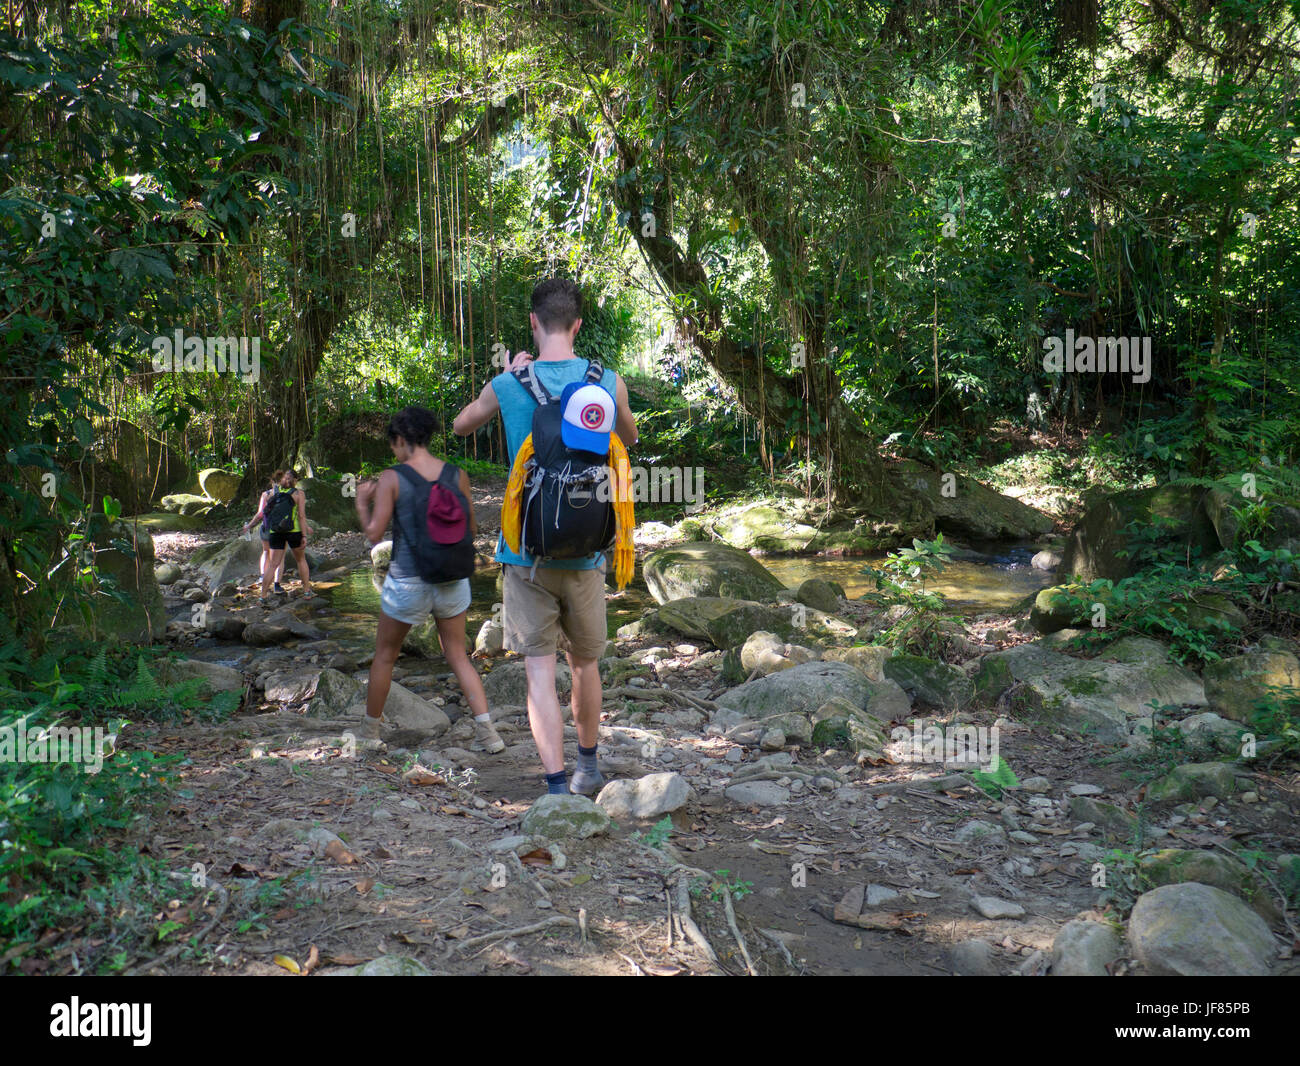 The trek to the Lost City, Sierra Nevada, Colombia, trekkers in rain forest Stock Photo